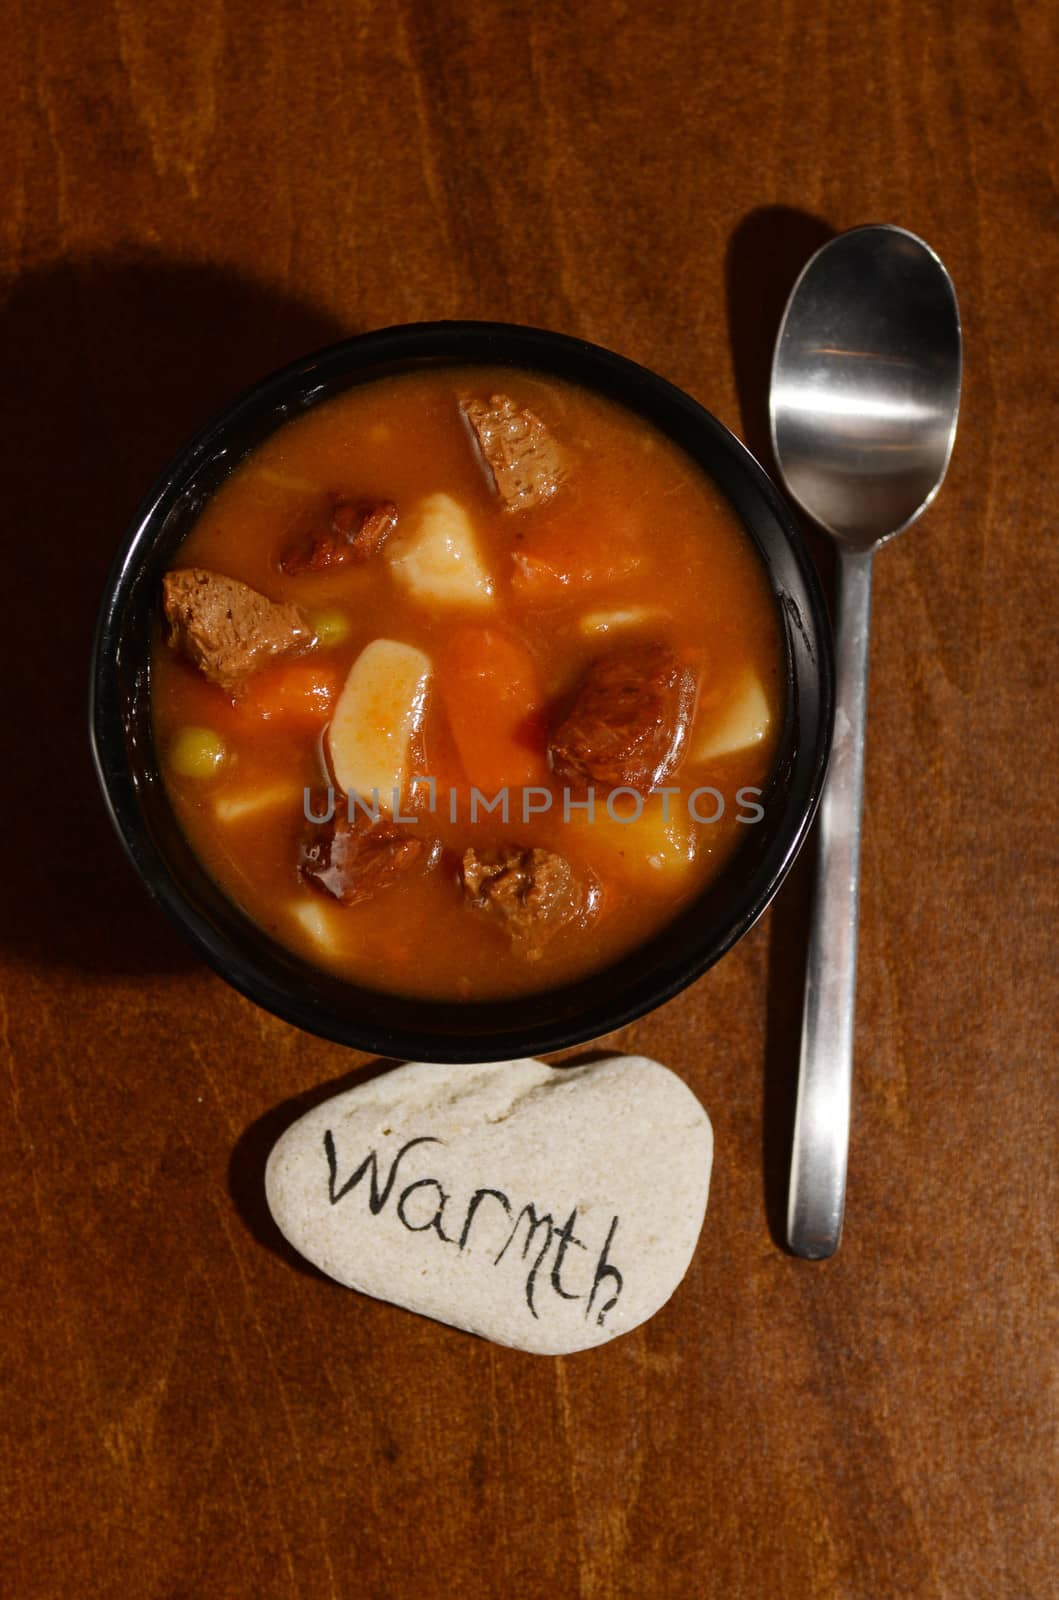 warmth and country beef stew by ftlaudgirl